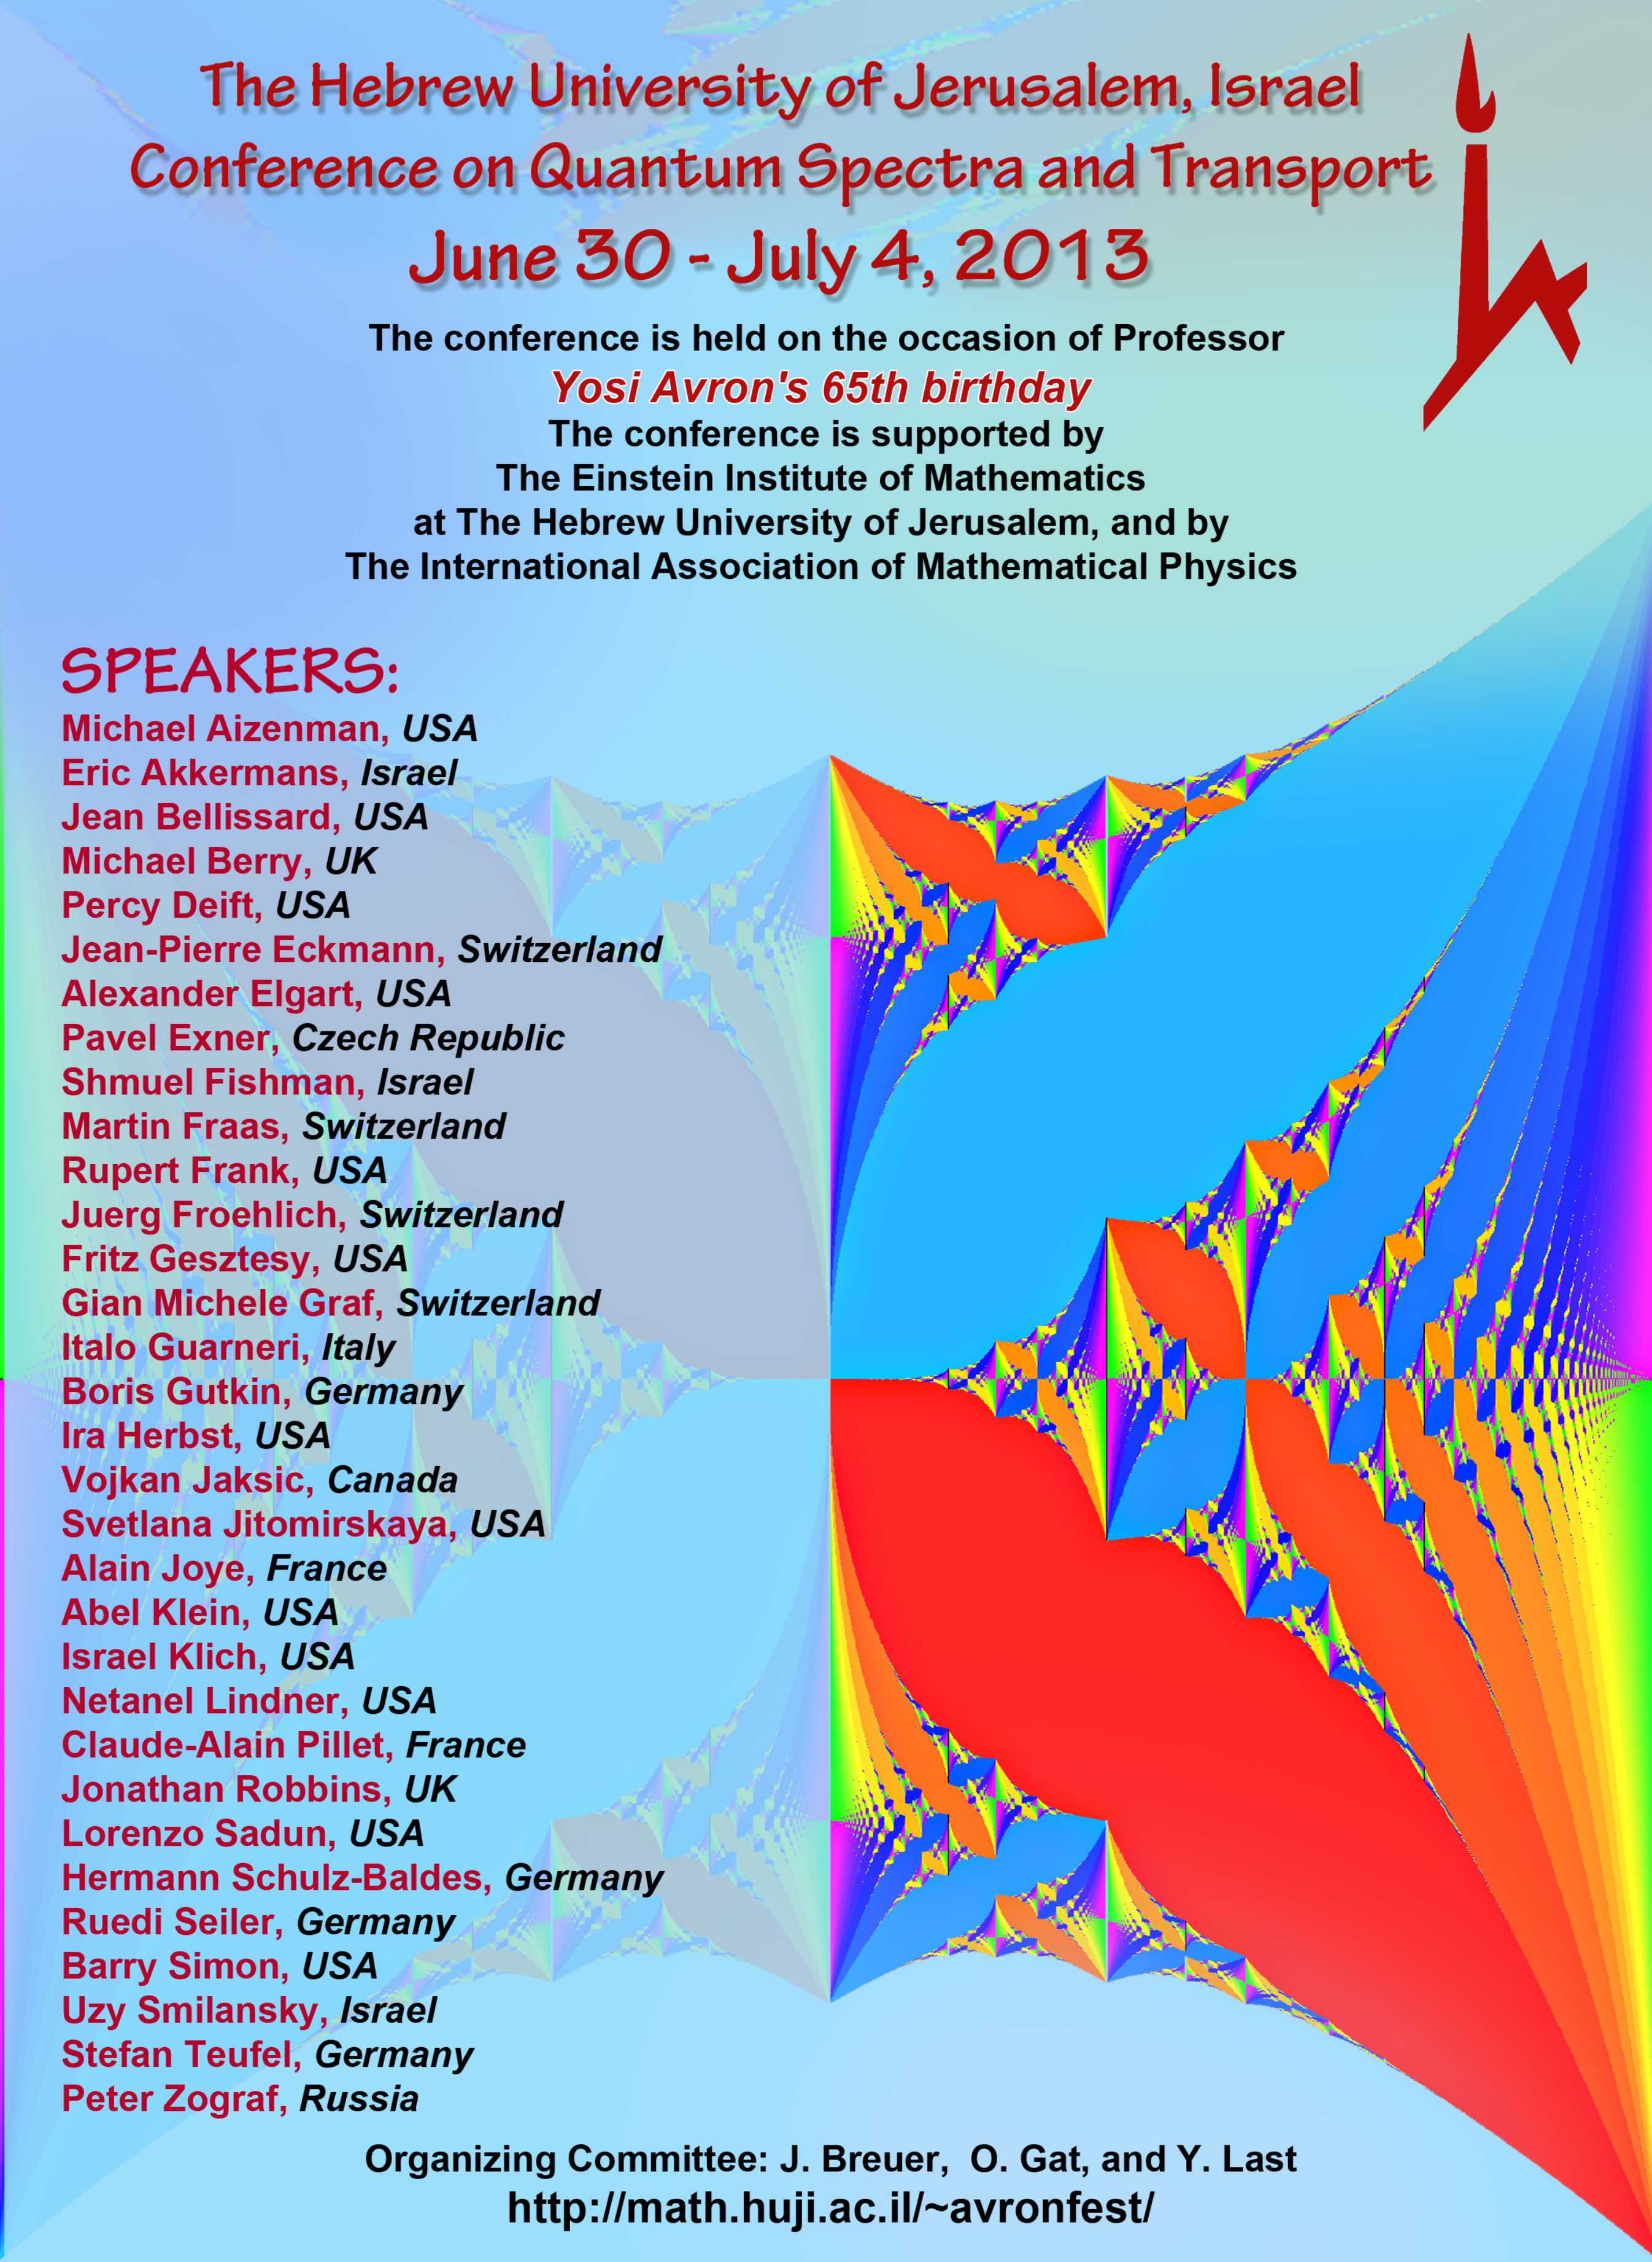 Poster of the quantum spectra and transport conference, 2013. the conference was held on the ocassion of Yossi's 65th birthday  